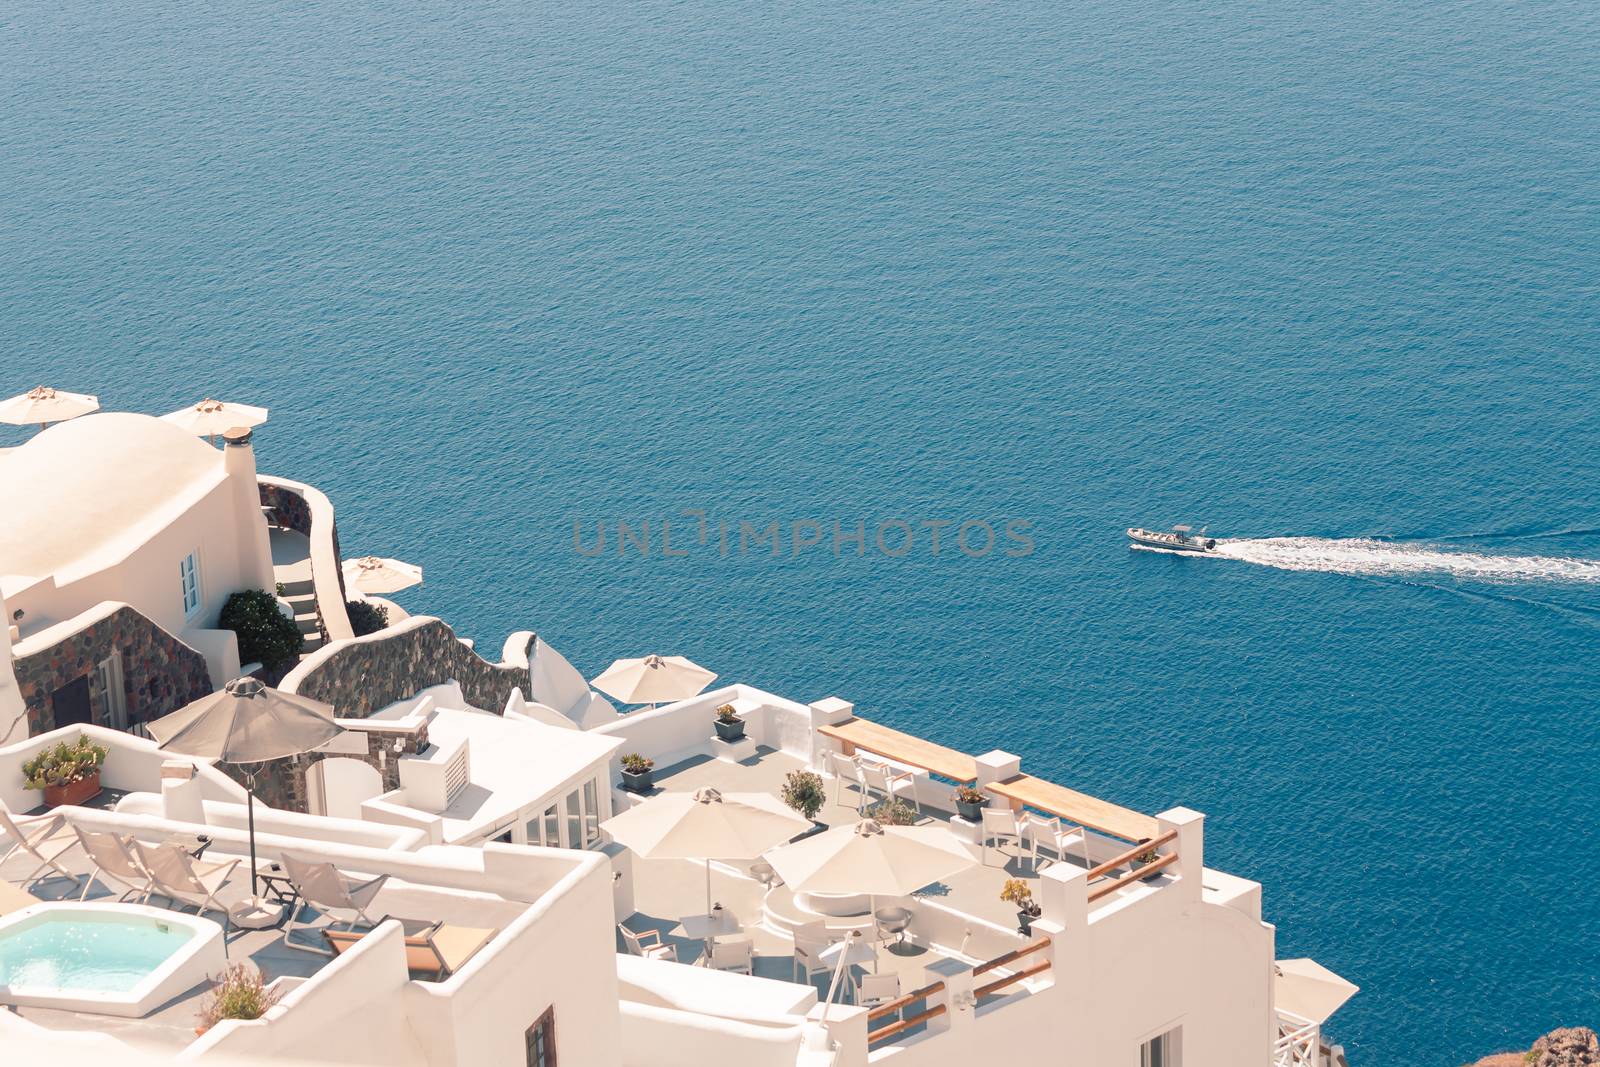 View on the seaside of Santorini island with ship on the sea by VIIIPhoto